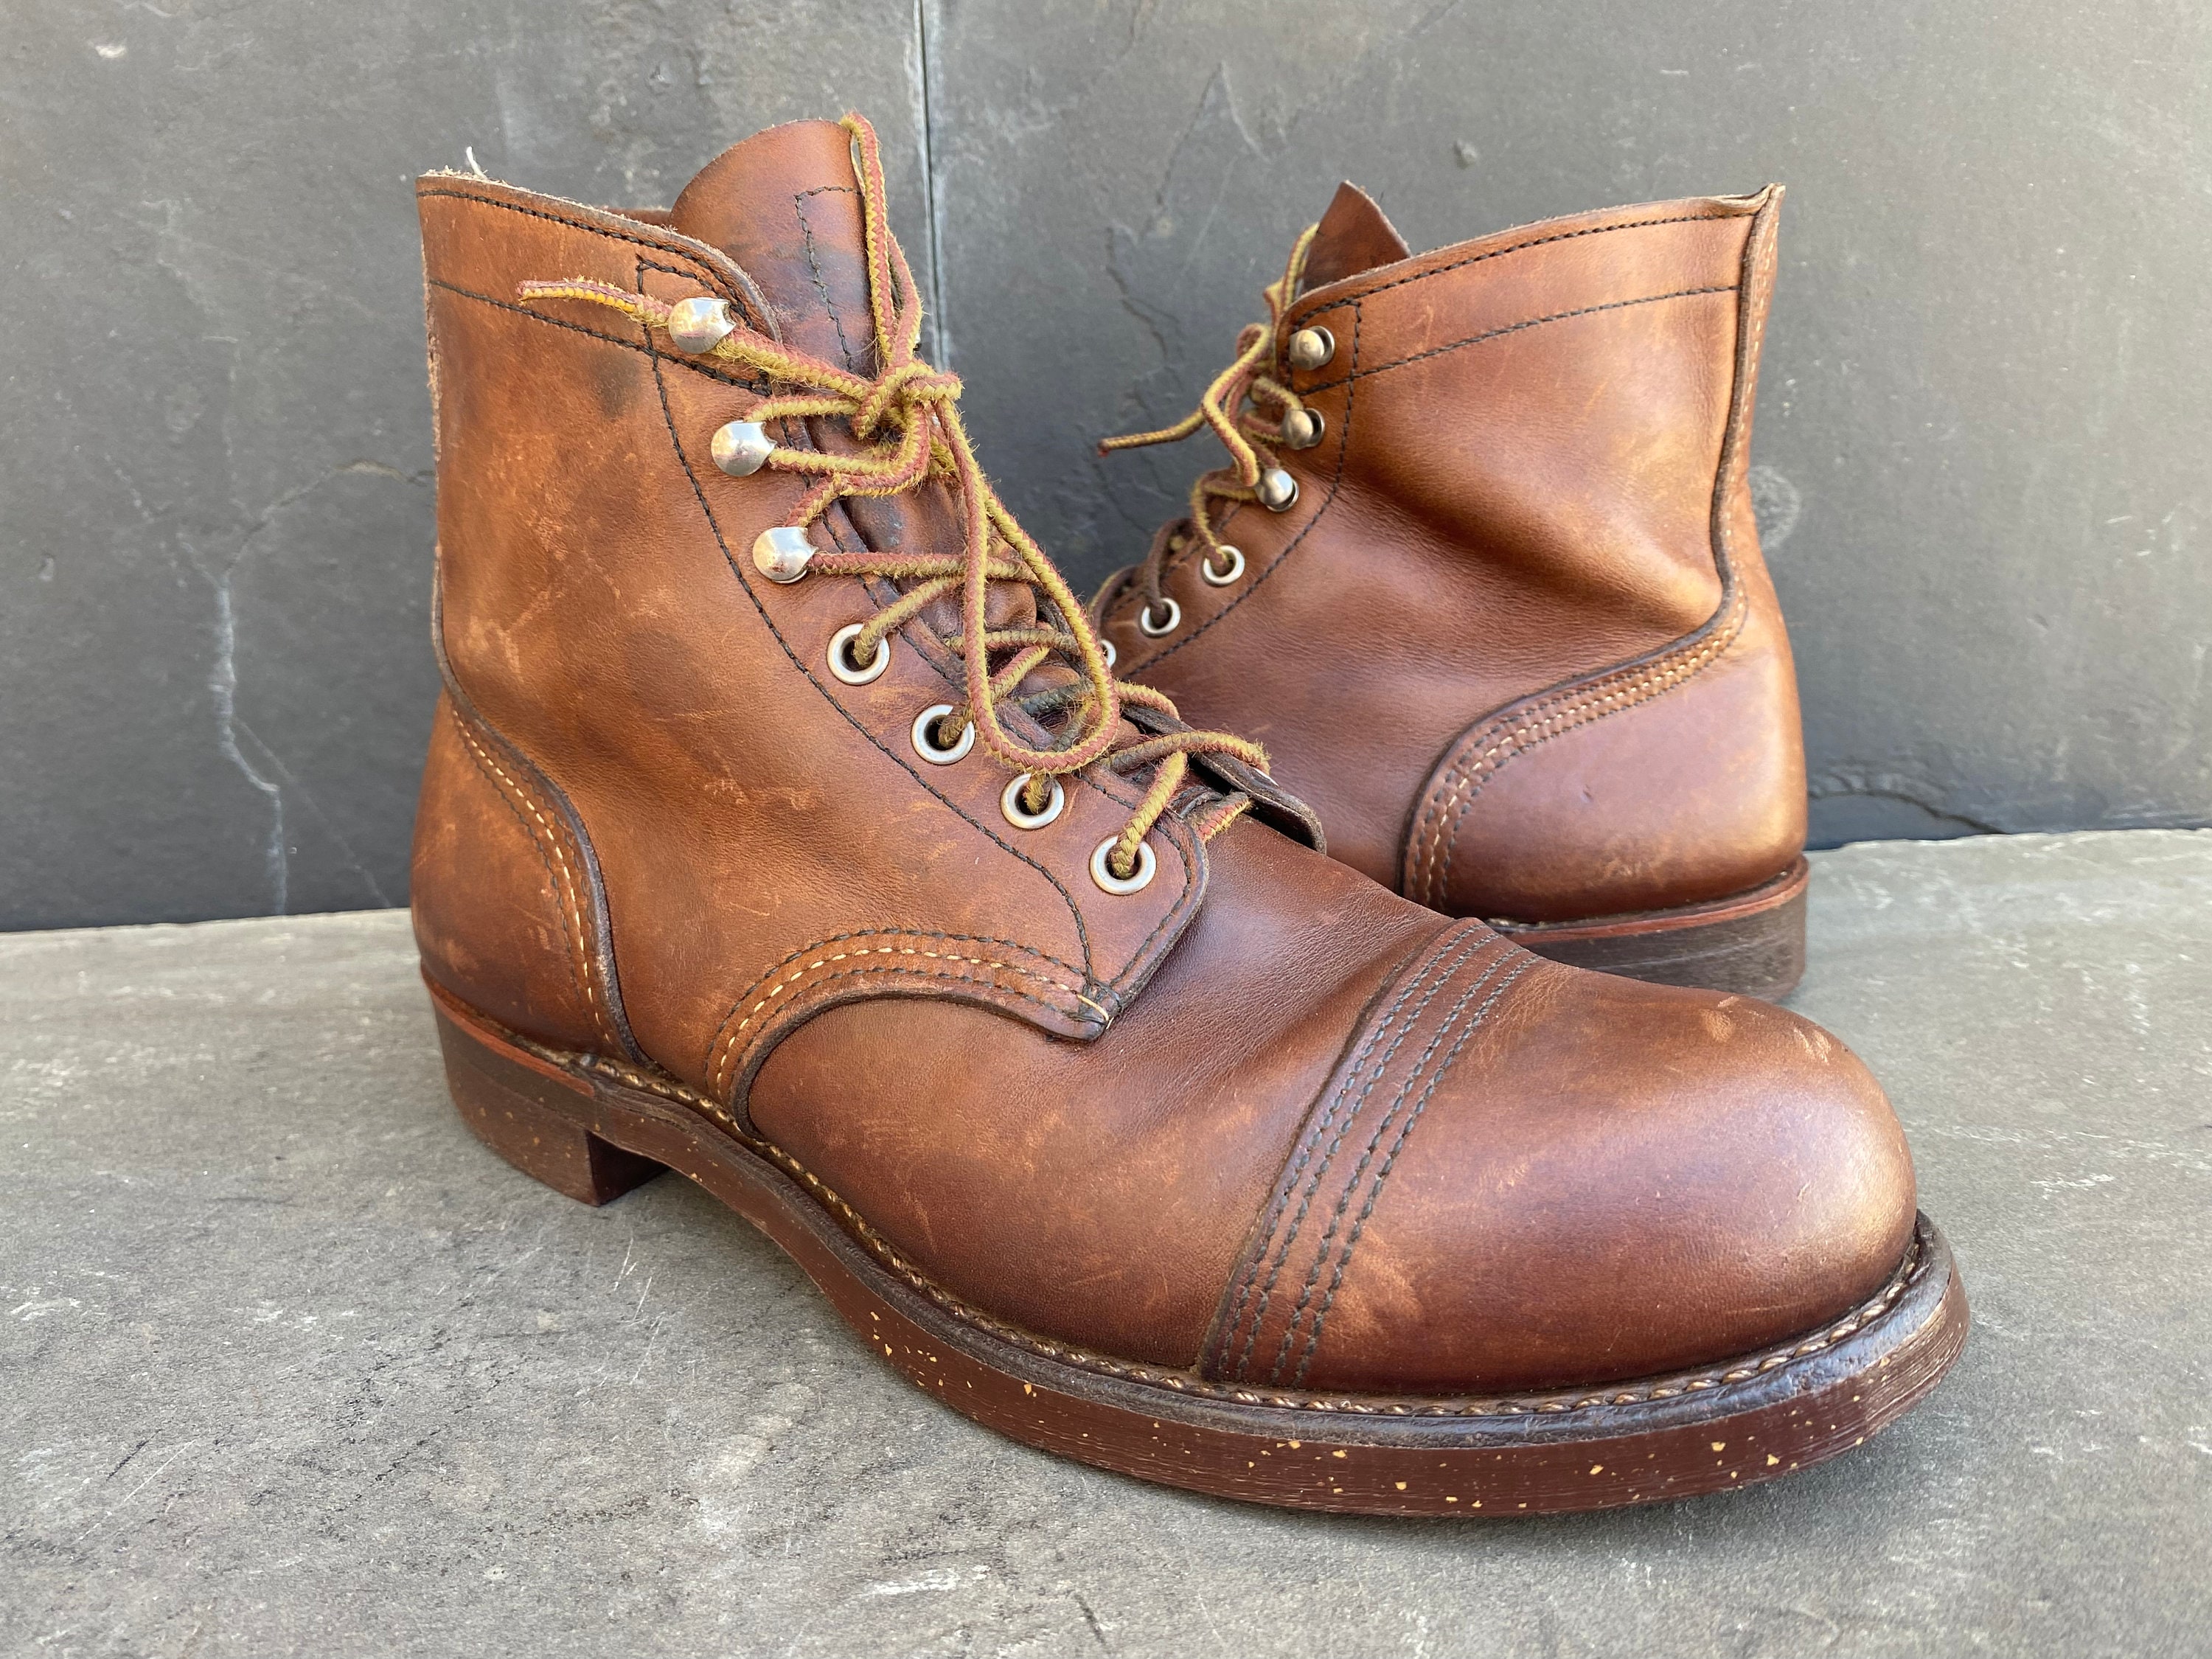 Red Wing Beckman Boot - Cigar Size 7.5 (Open Box)